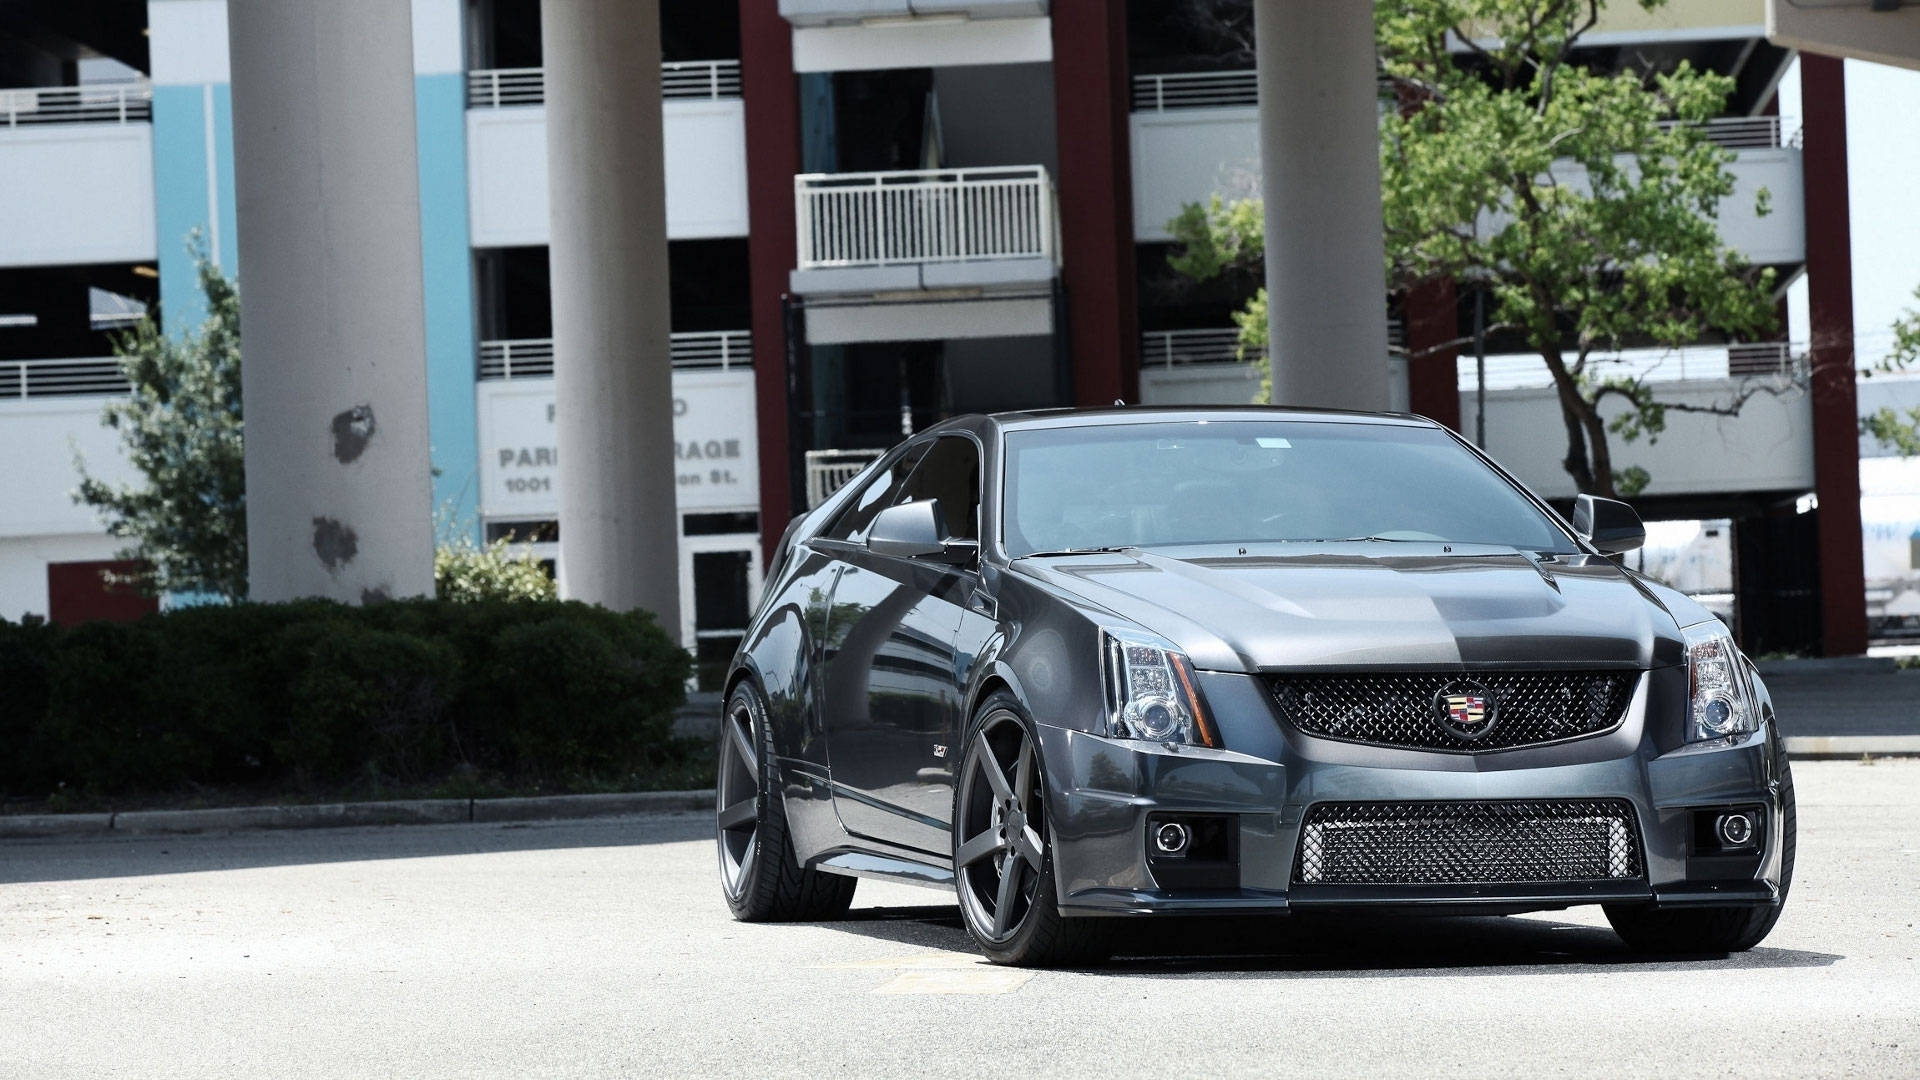 2011 Cadillac Cts-v From Iphone Background